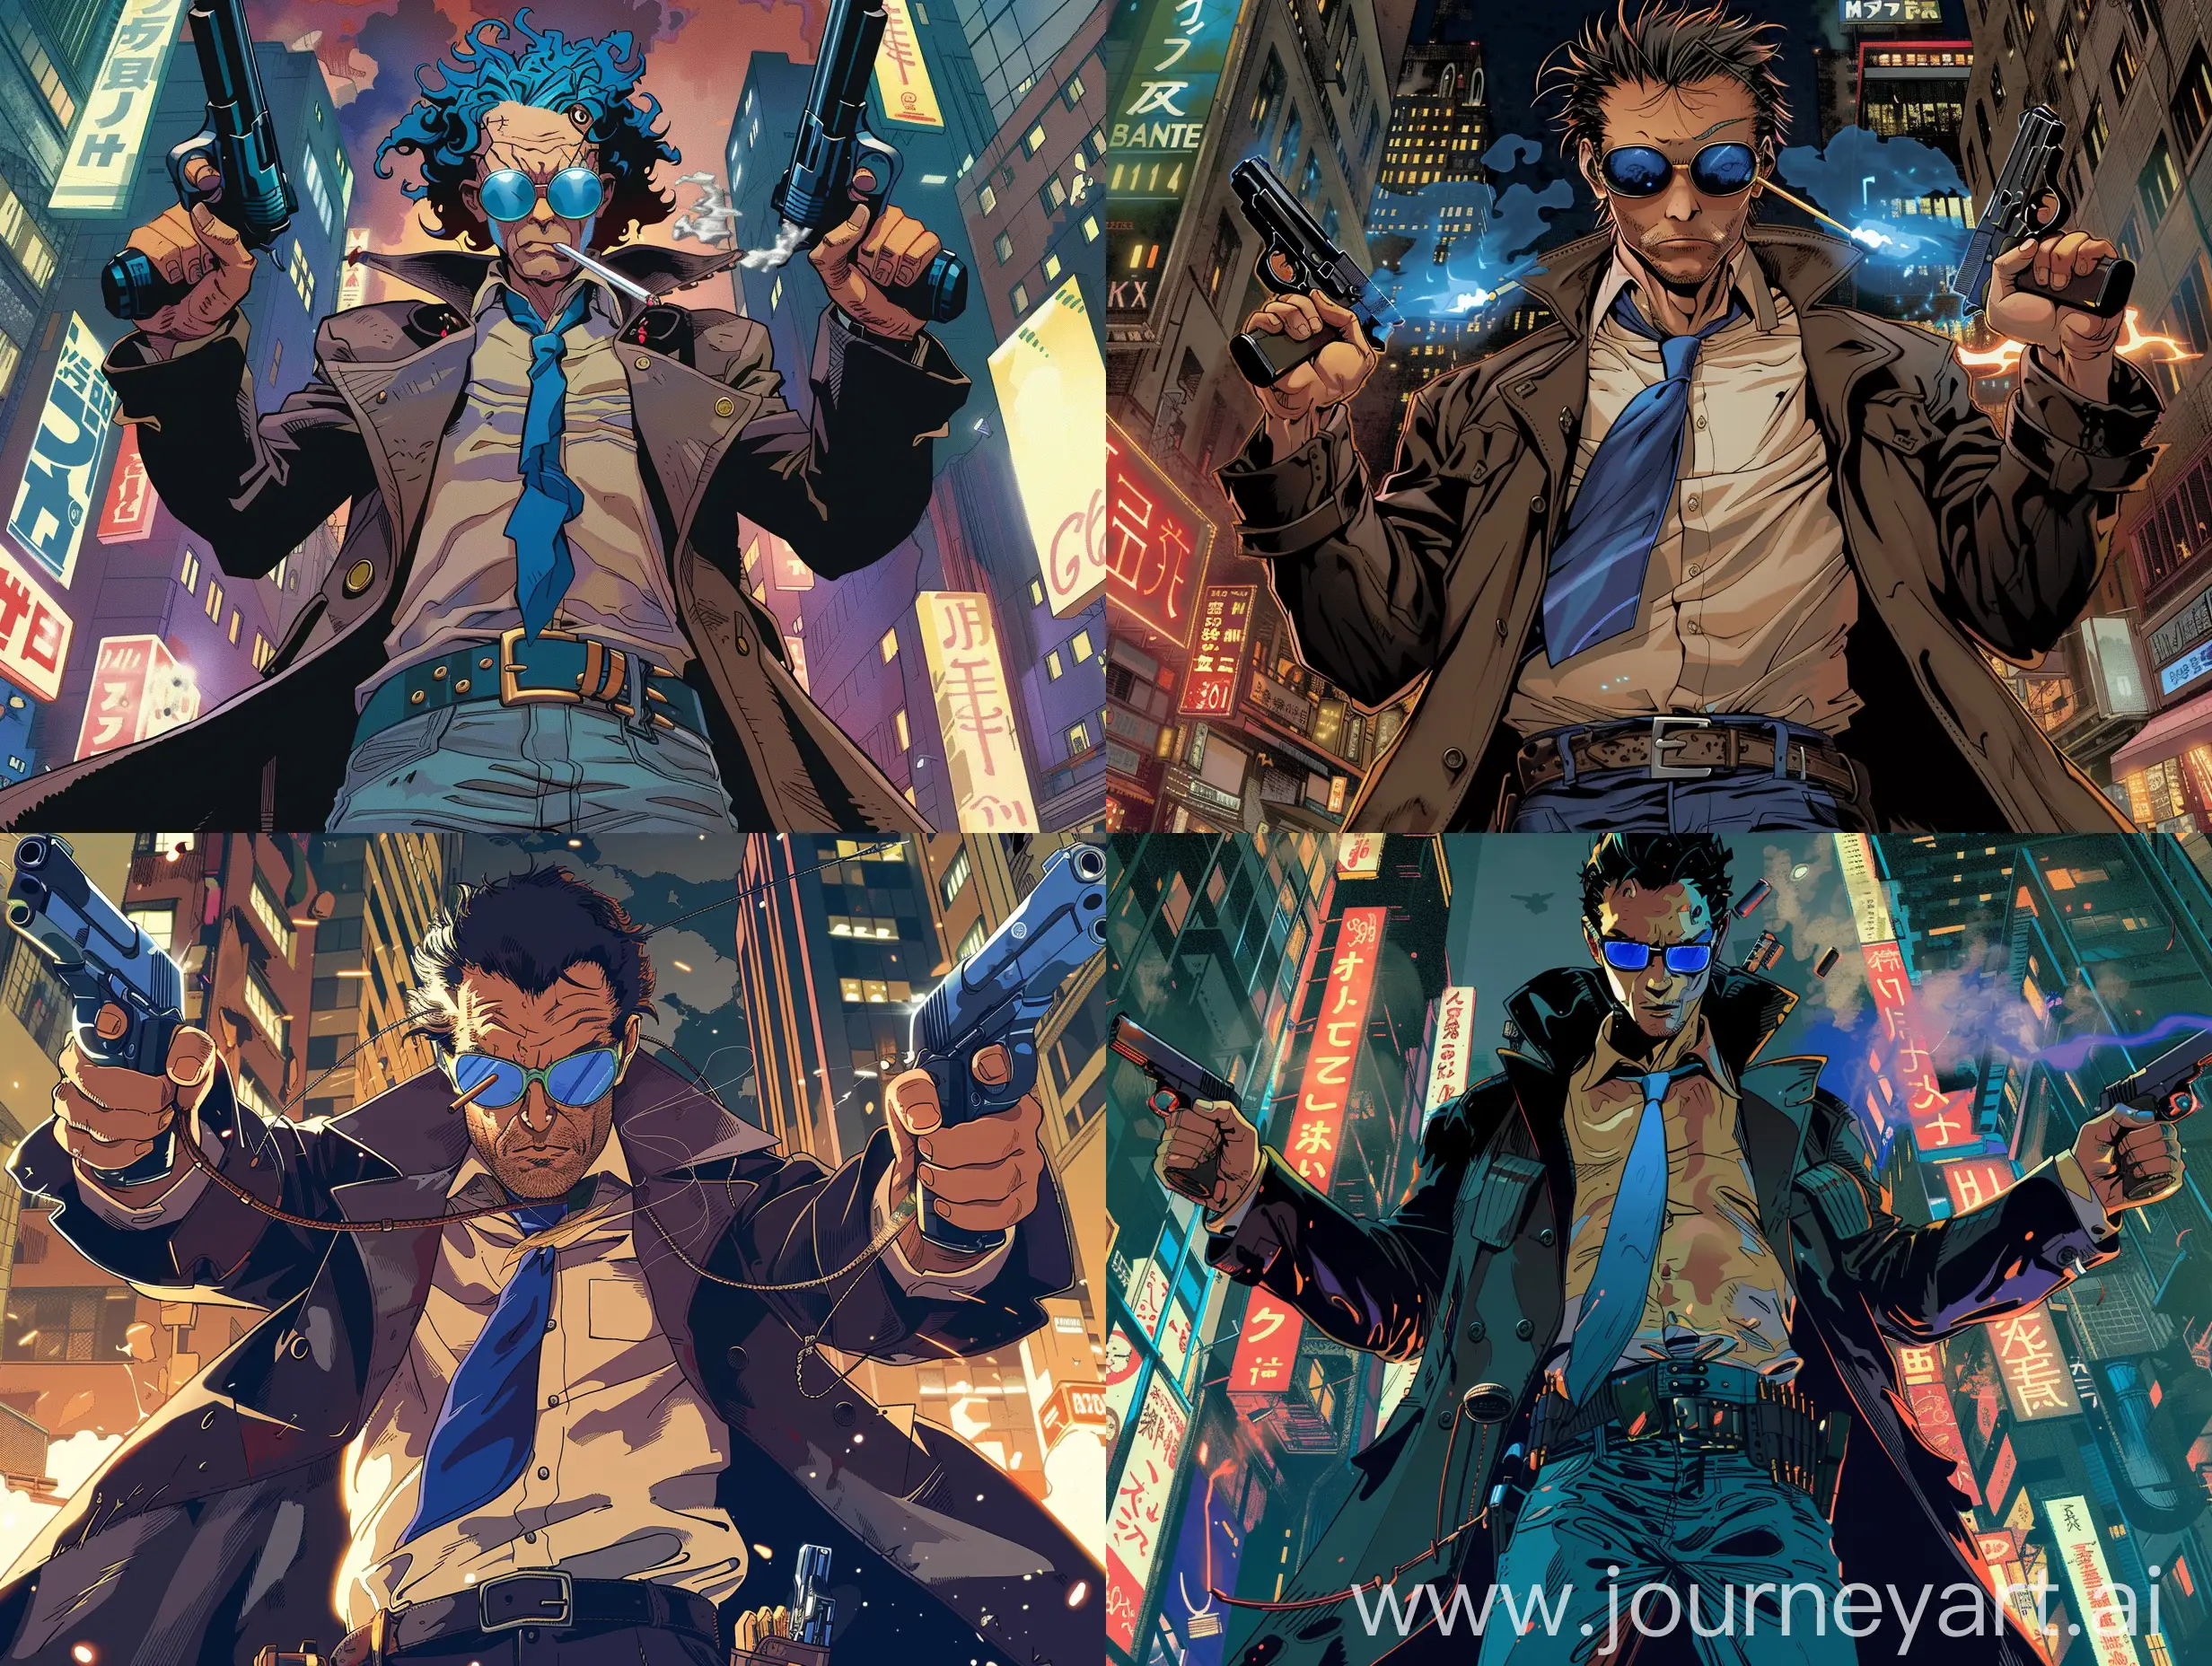 manga masterpiece, This digital artwork, likely by a contemporary cartoonist or caricature artist, features a colorful and exaggerated style, caricature artwork, recognizable by its exaggerated features and cartoonish style. The artist is unknown. The composition centers on a man wearing blue-tinted sunglasses, a dark trench coat over a beige shirt, blue tie, and jeans. He holds a revolver in each hand and has a cigarette hanging from his mouth. The background is late night city, The artwork accentuates the subject's cool, tough demeanor with an oversized head and prominent facial features, maintaining a humorous, exaggerated tone, hyper details, irony, craziness, and an exaggerated comedic atmosphere.
